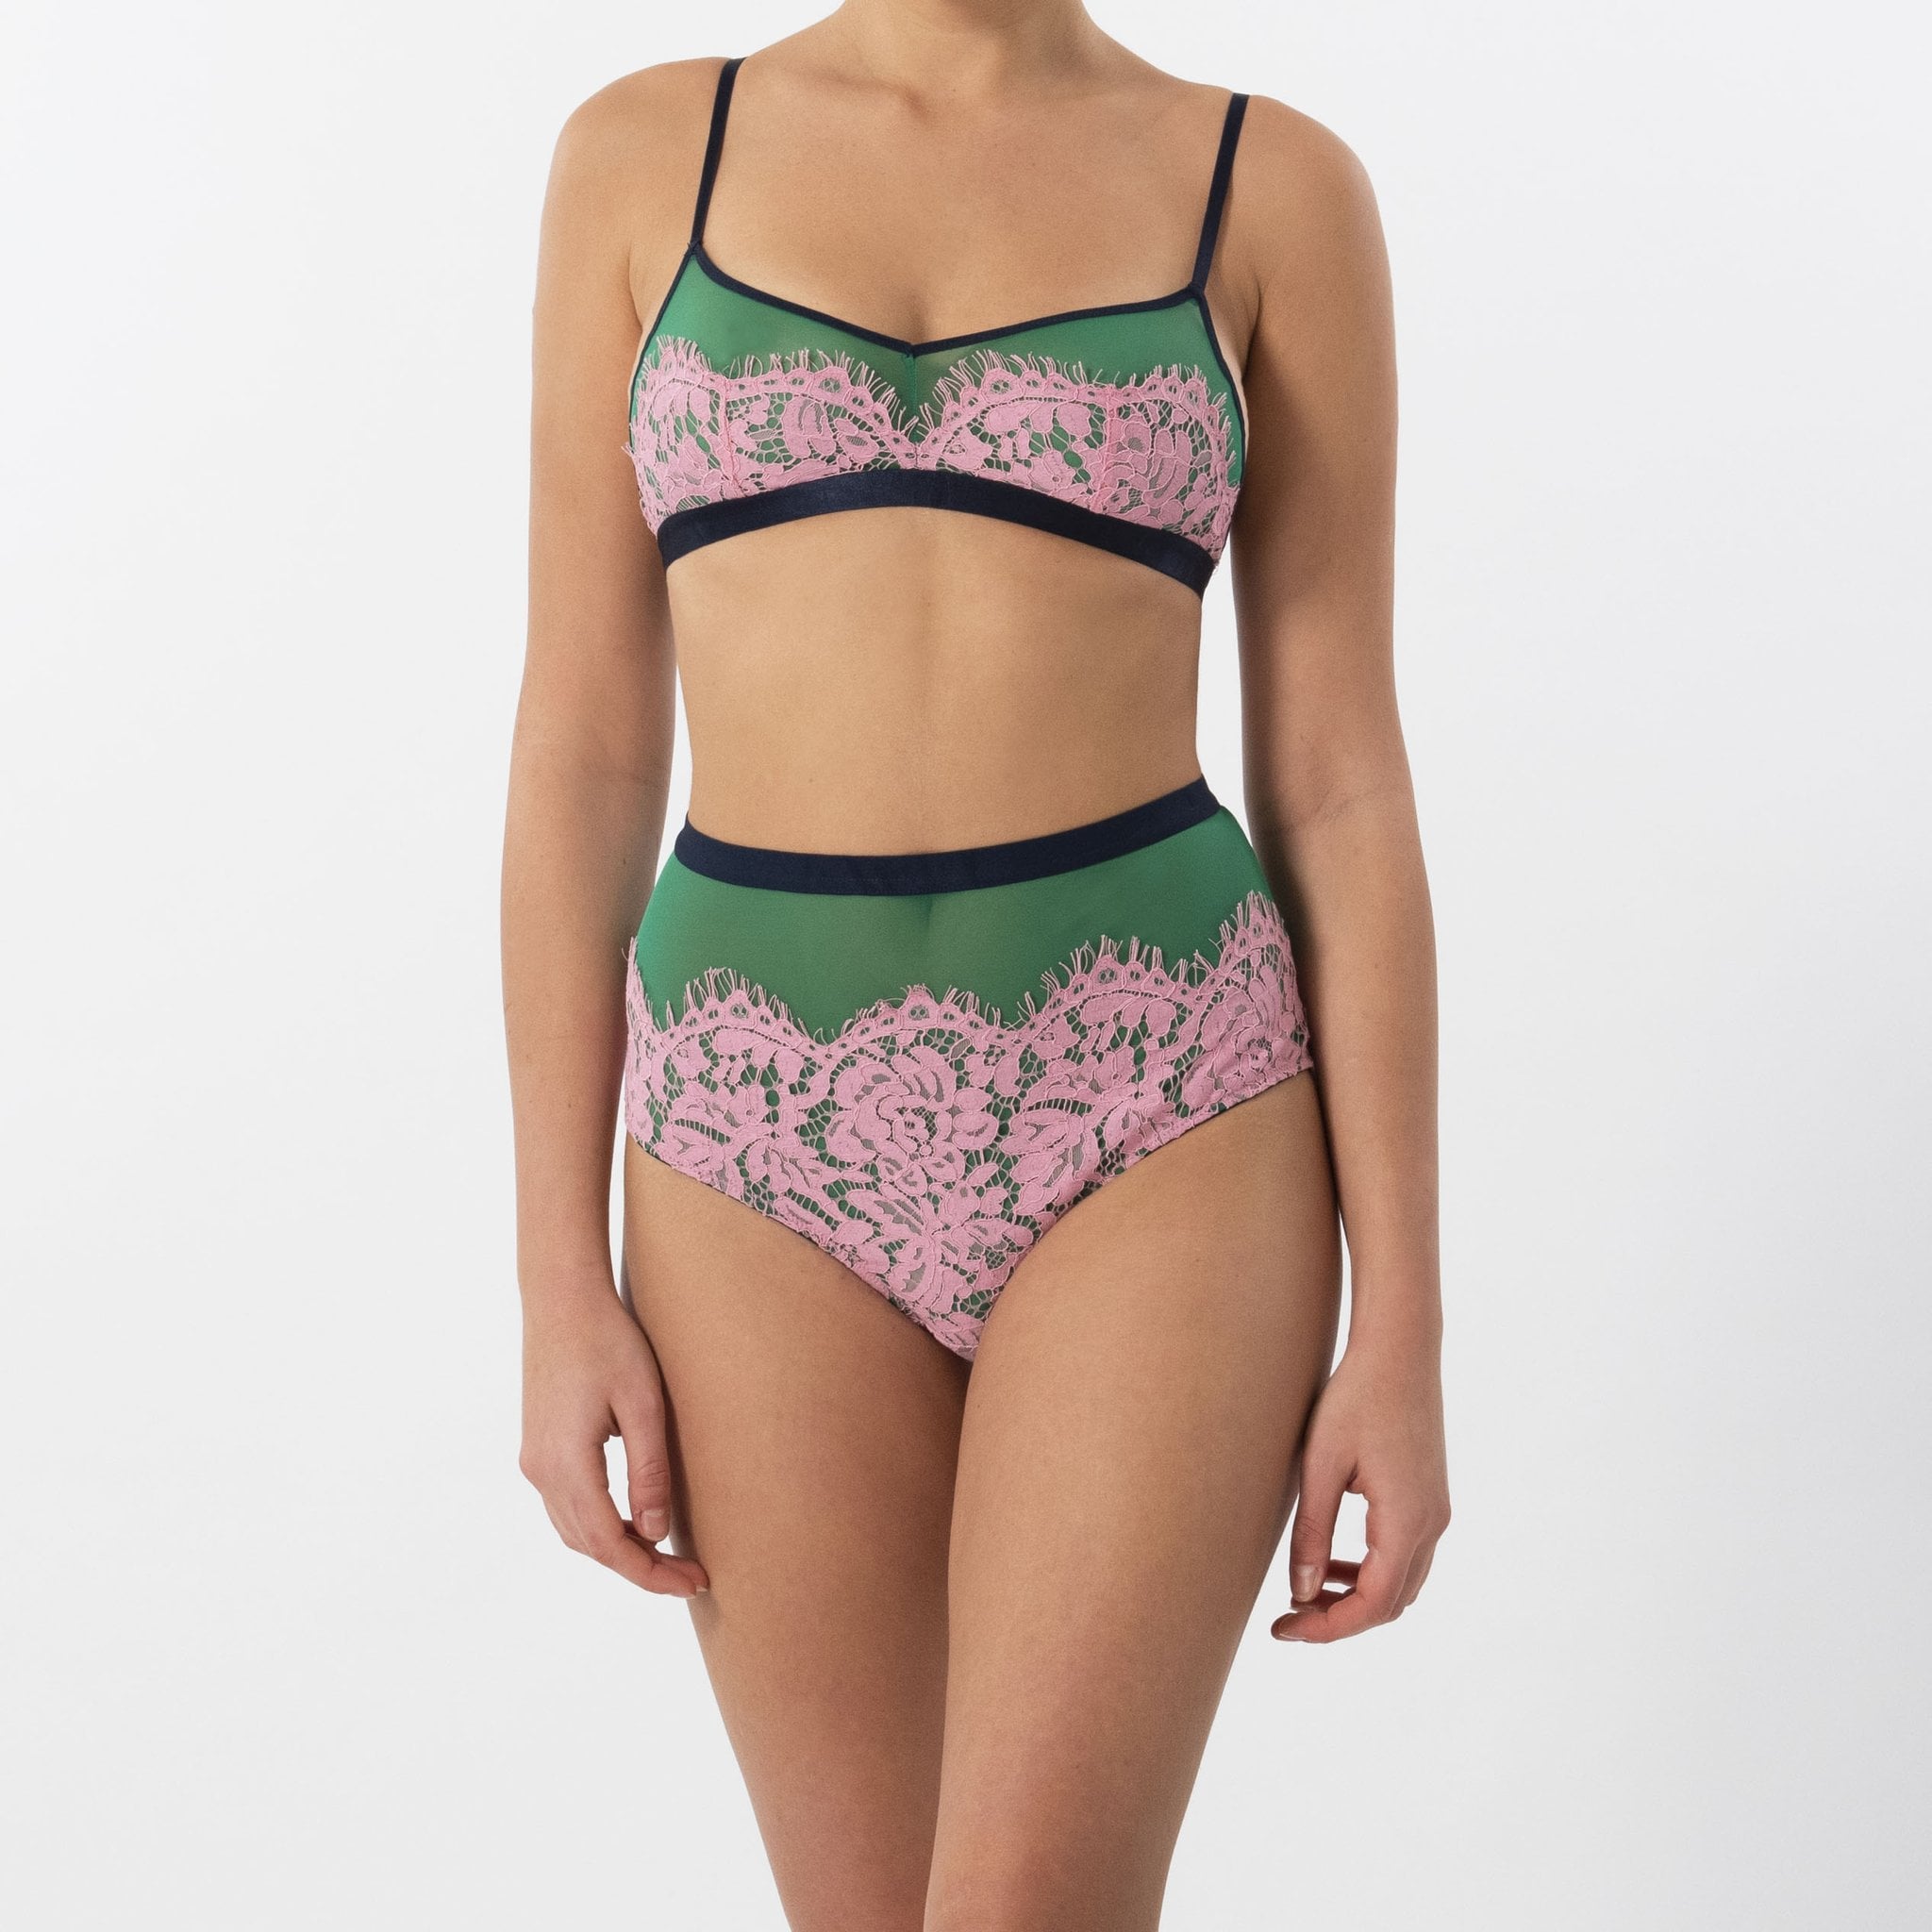 Dora Larsen Pernille Lingerie Set, Our April Fashion Wish List Reminds Us  of Our Youth, and We Love That